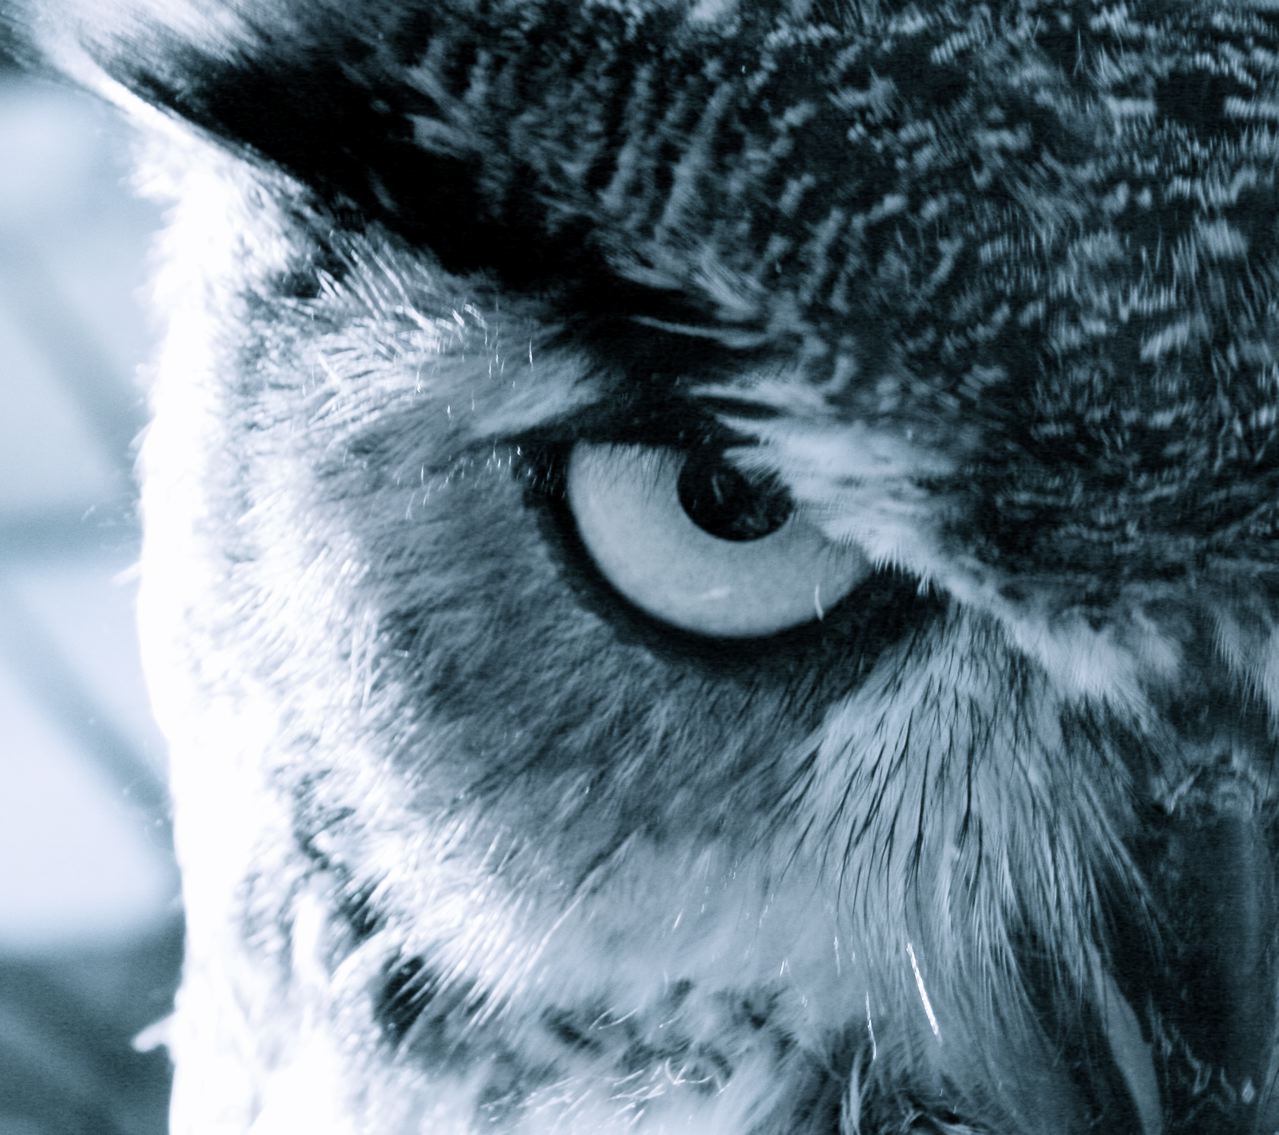 Angry Owl Face Wallpapers